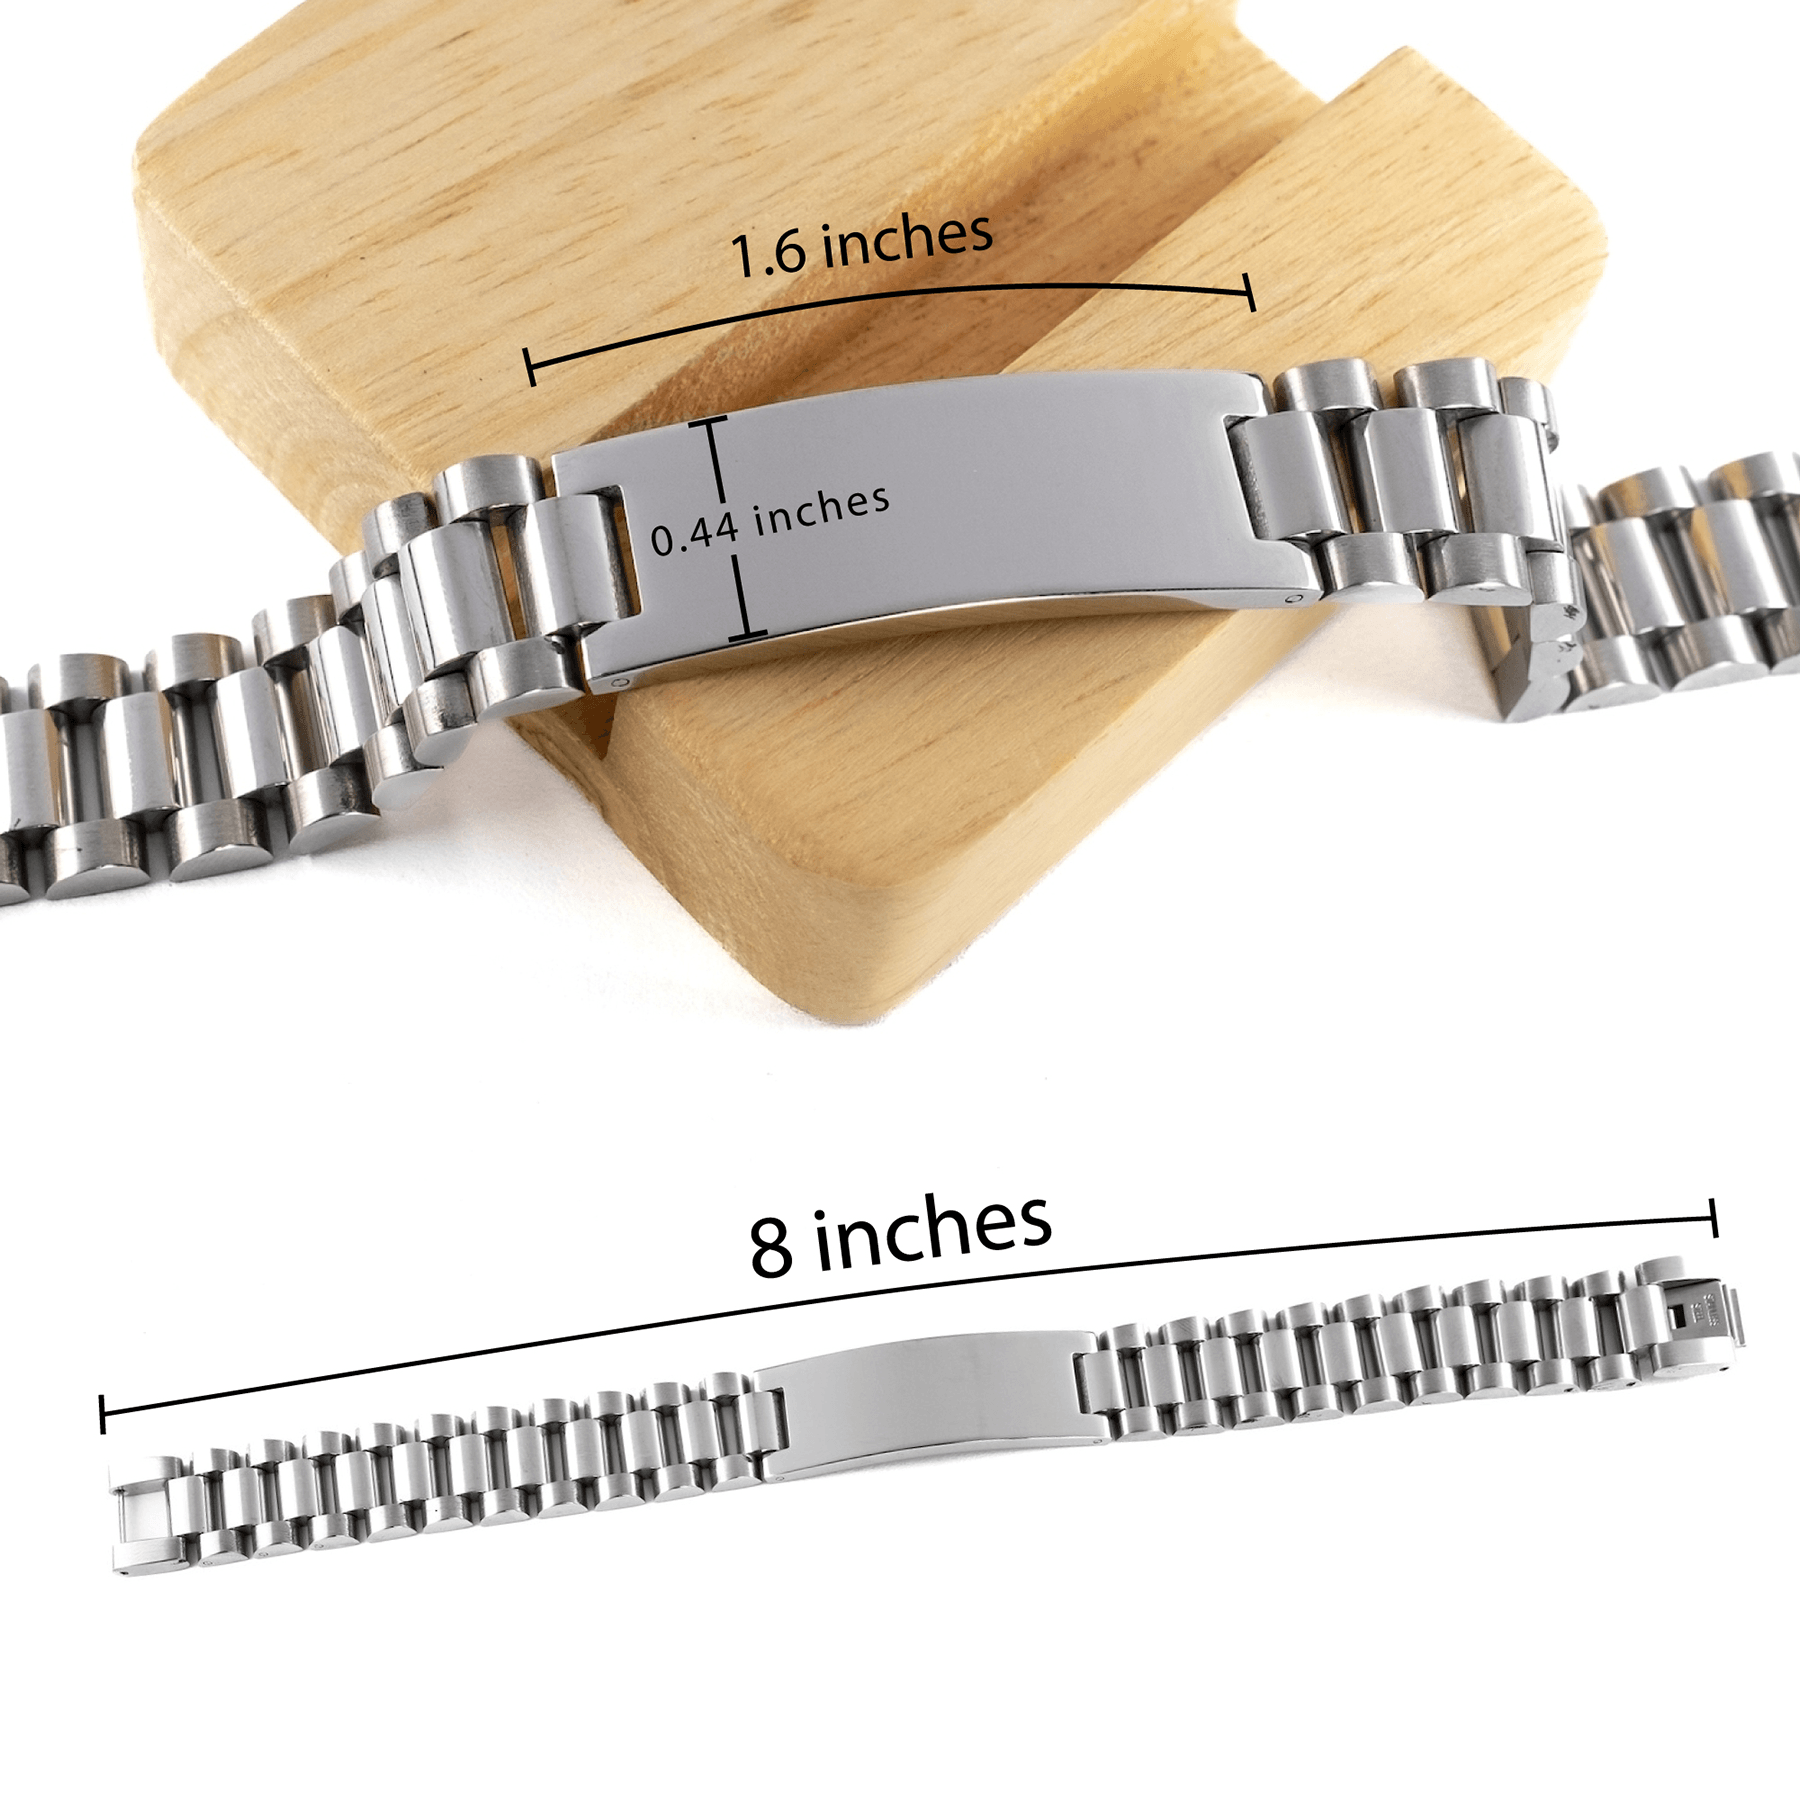 Mortician Ladder Stainless Steel Engraved Bracelet - Thanks for being who you are - Birthday Christmas Jewelry Gifts Coworkers Colleague Boss - Mallard Moon Gift Shop